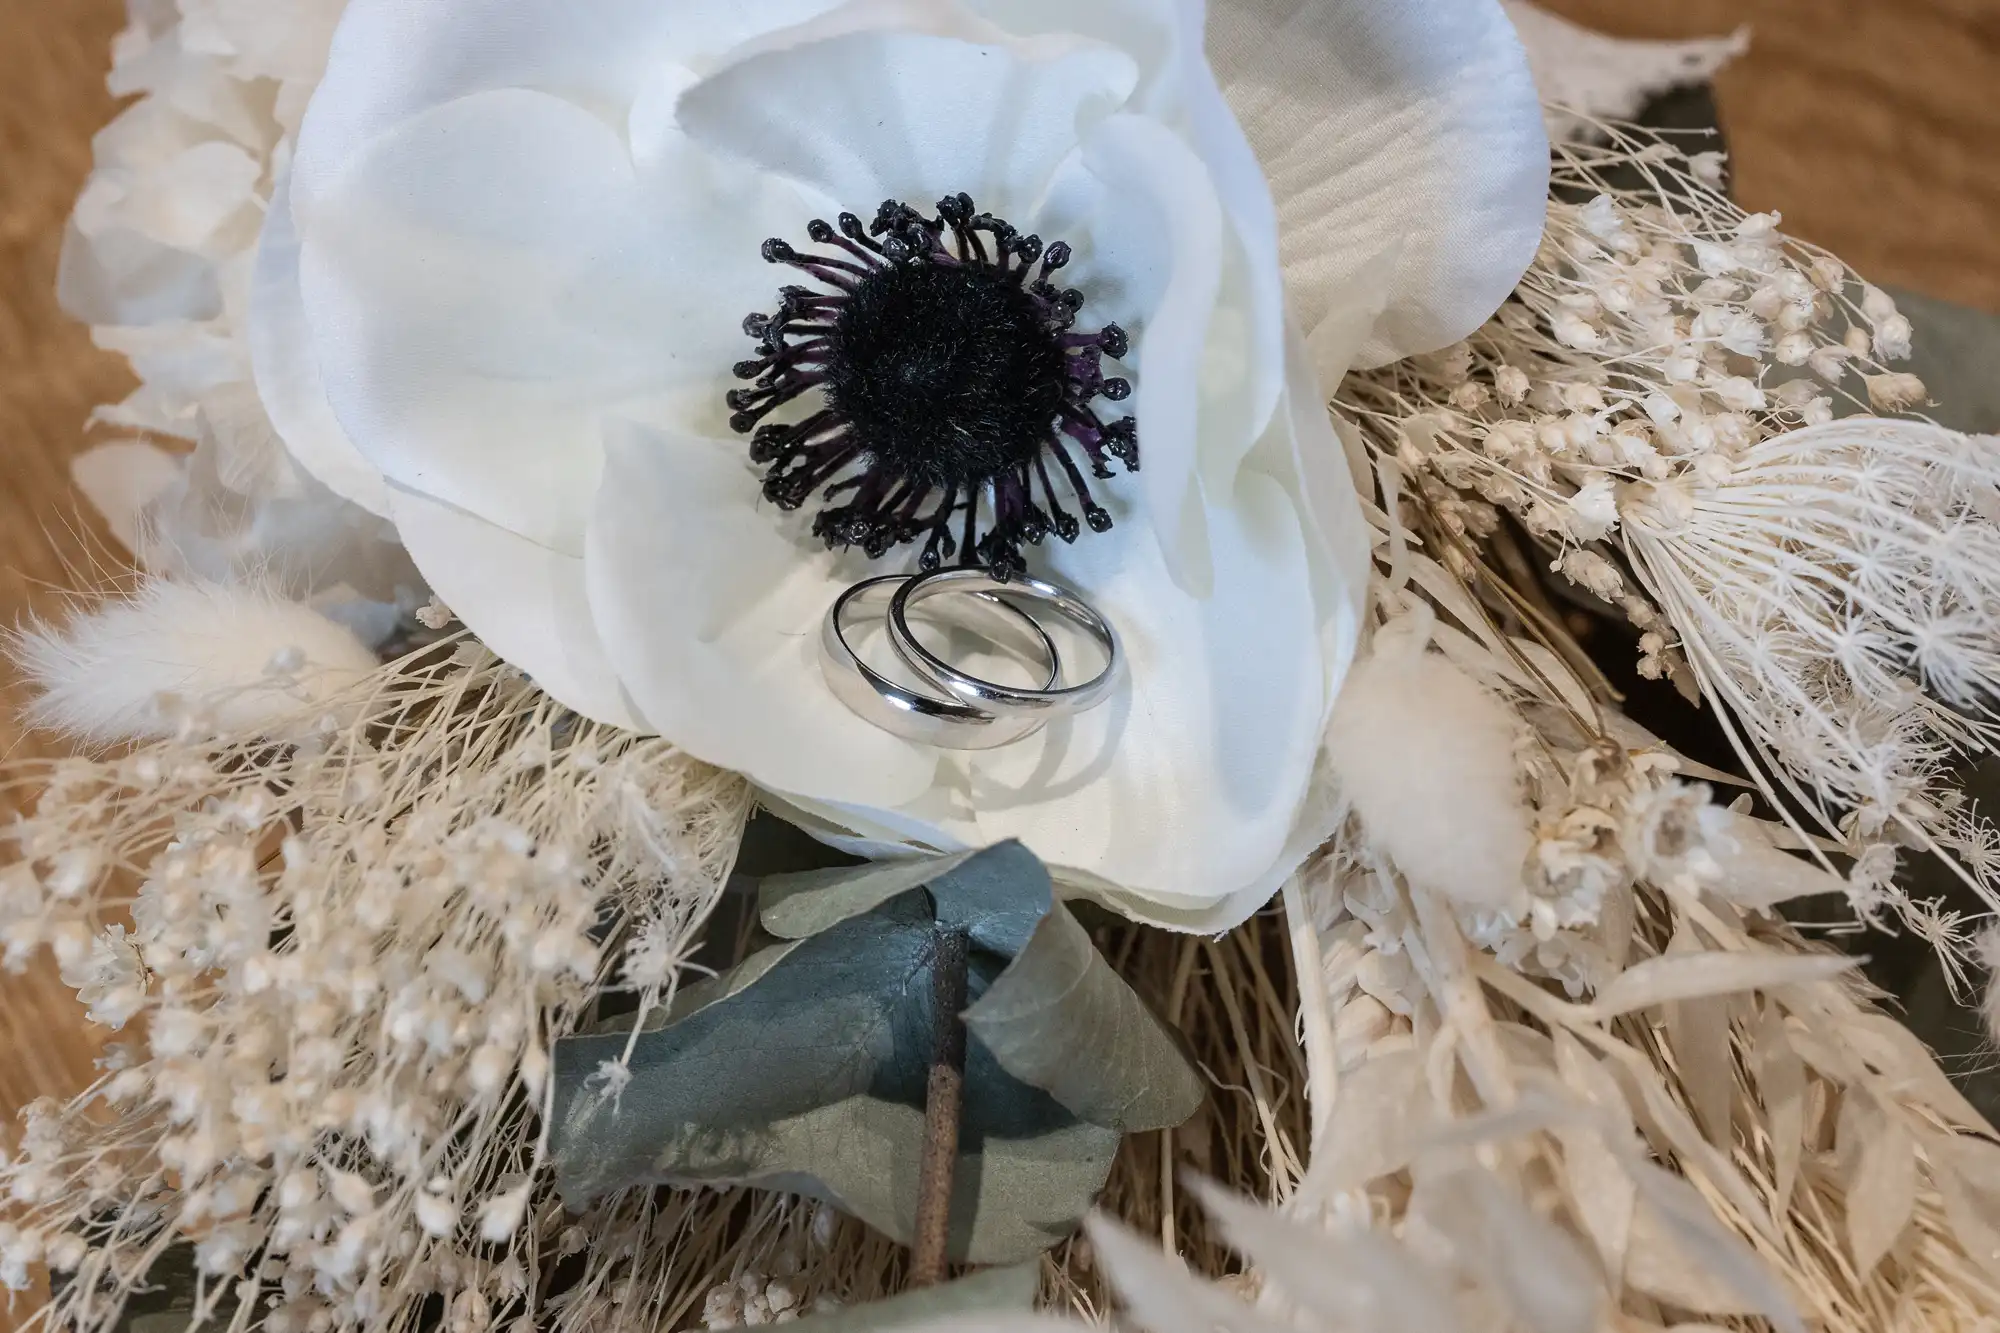 Two silver wedding rings rest on a white flower with black center, surrounded by an arrangement of dried flowers and grasses.